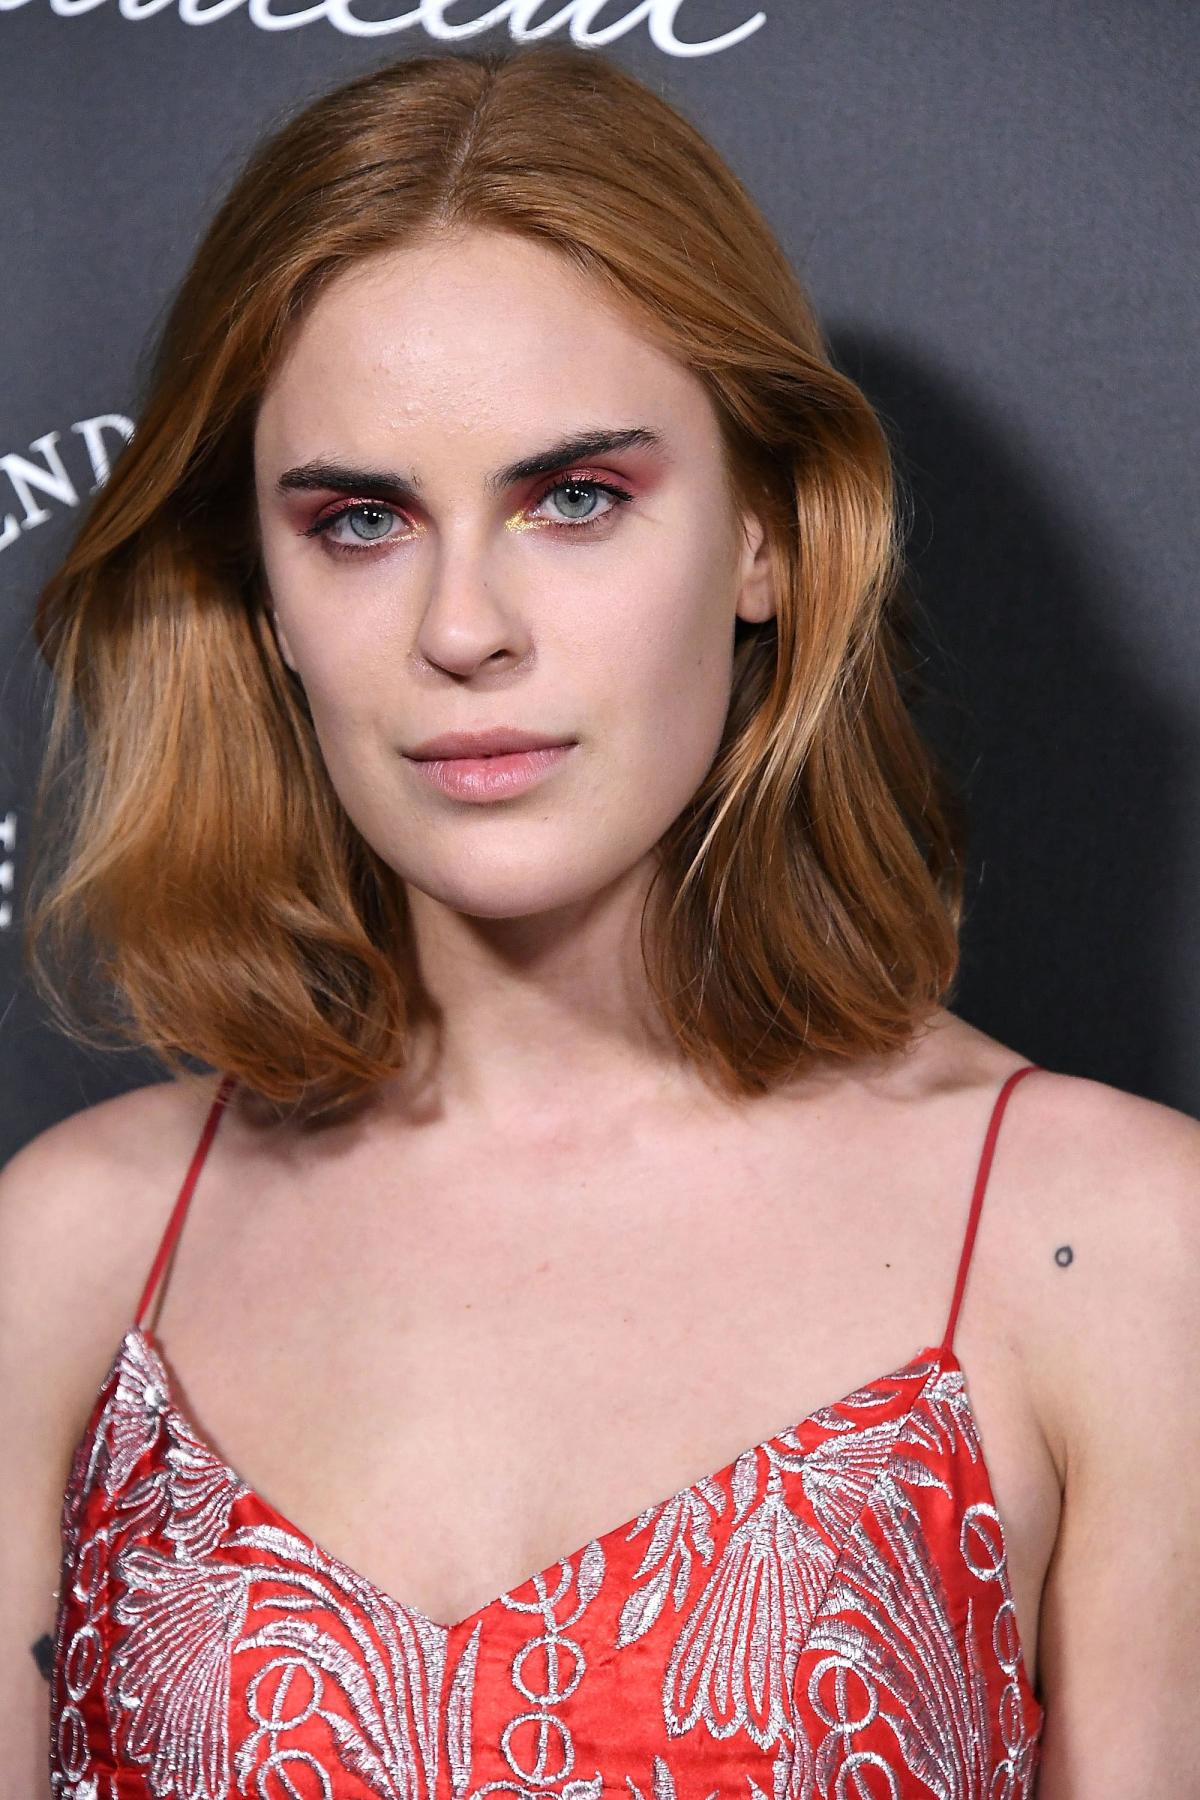 Tallulah Willis Channels Her Mom Demi Moore’s Famous '90s Haircut